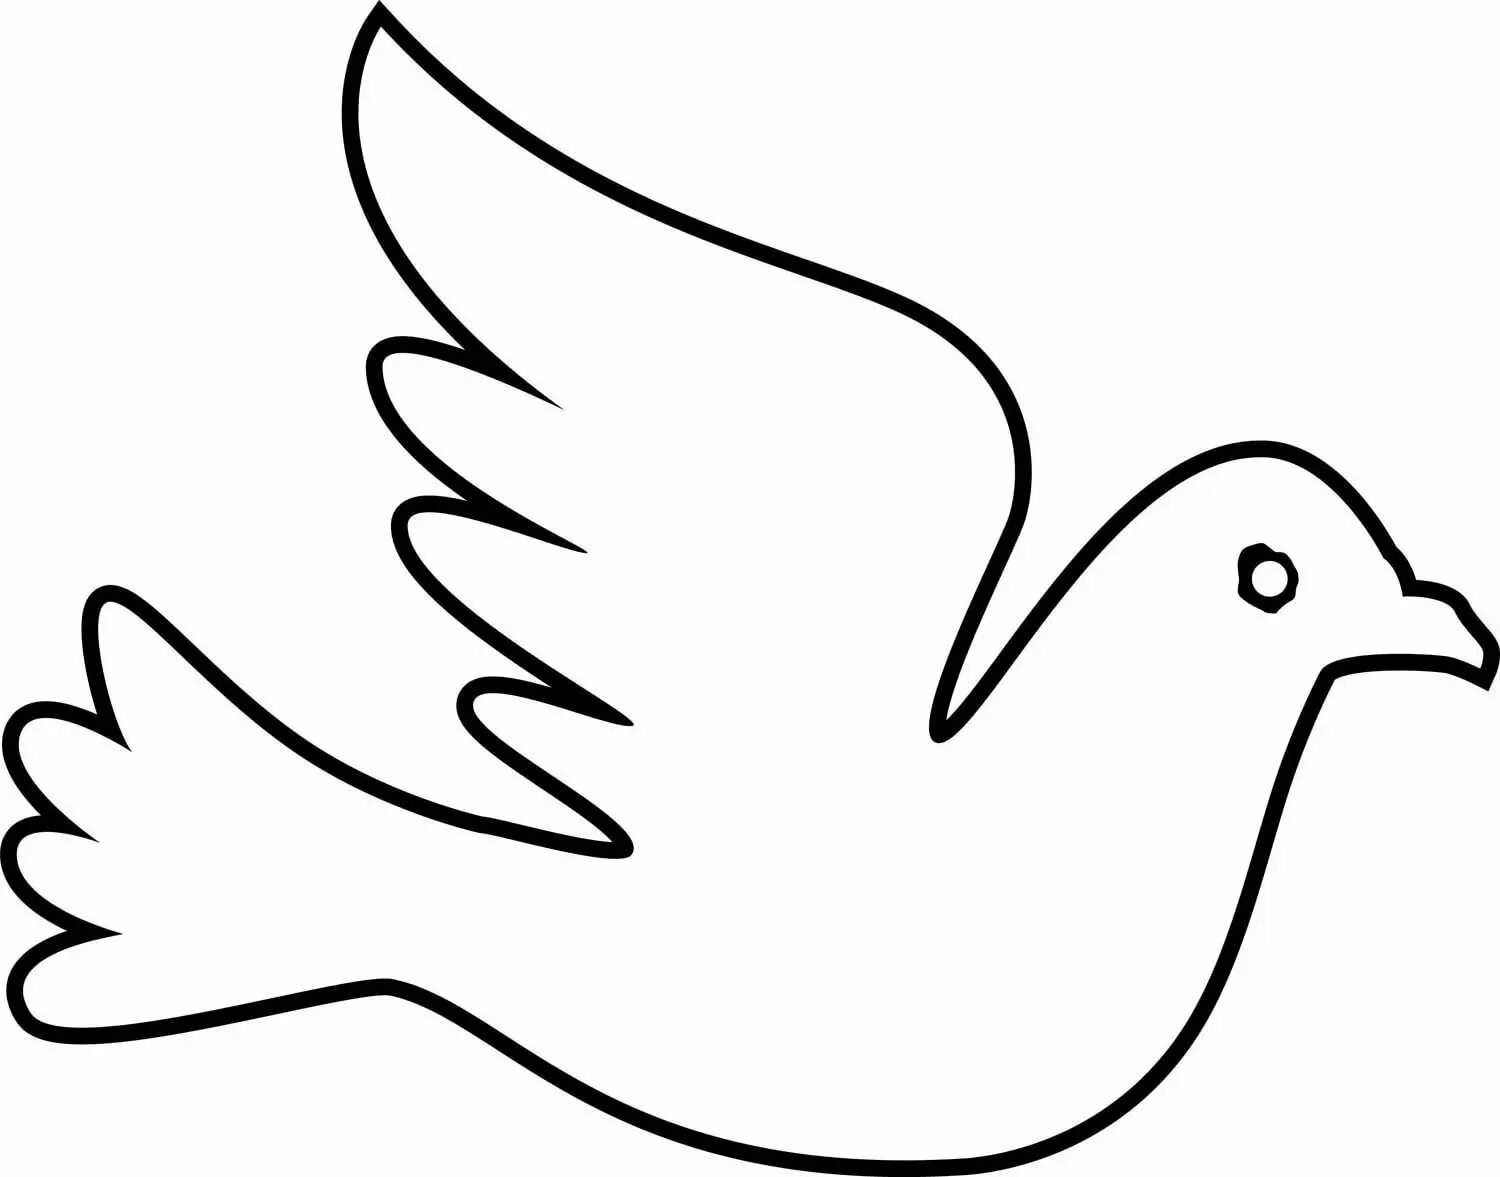 Peace dove for kids template #3